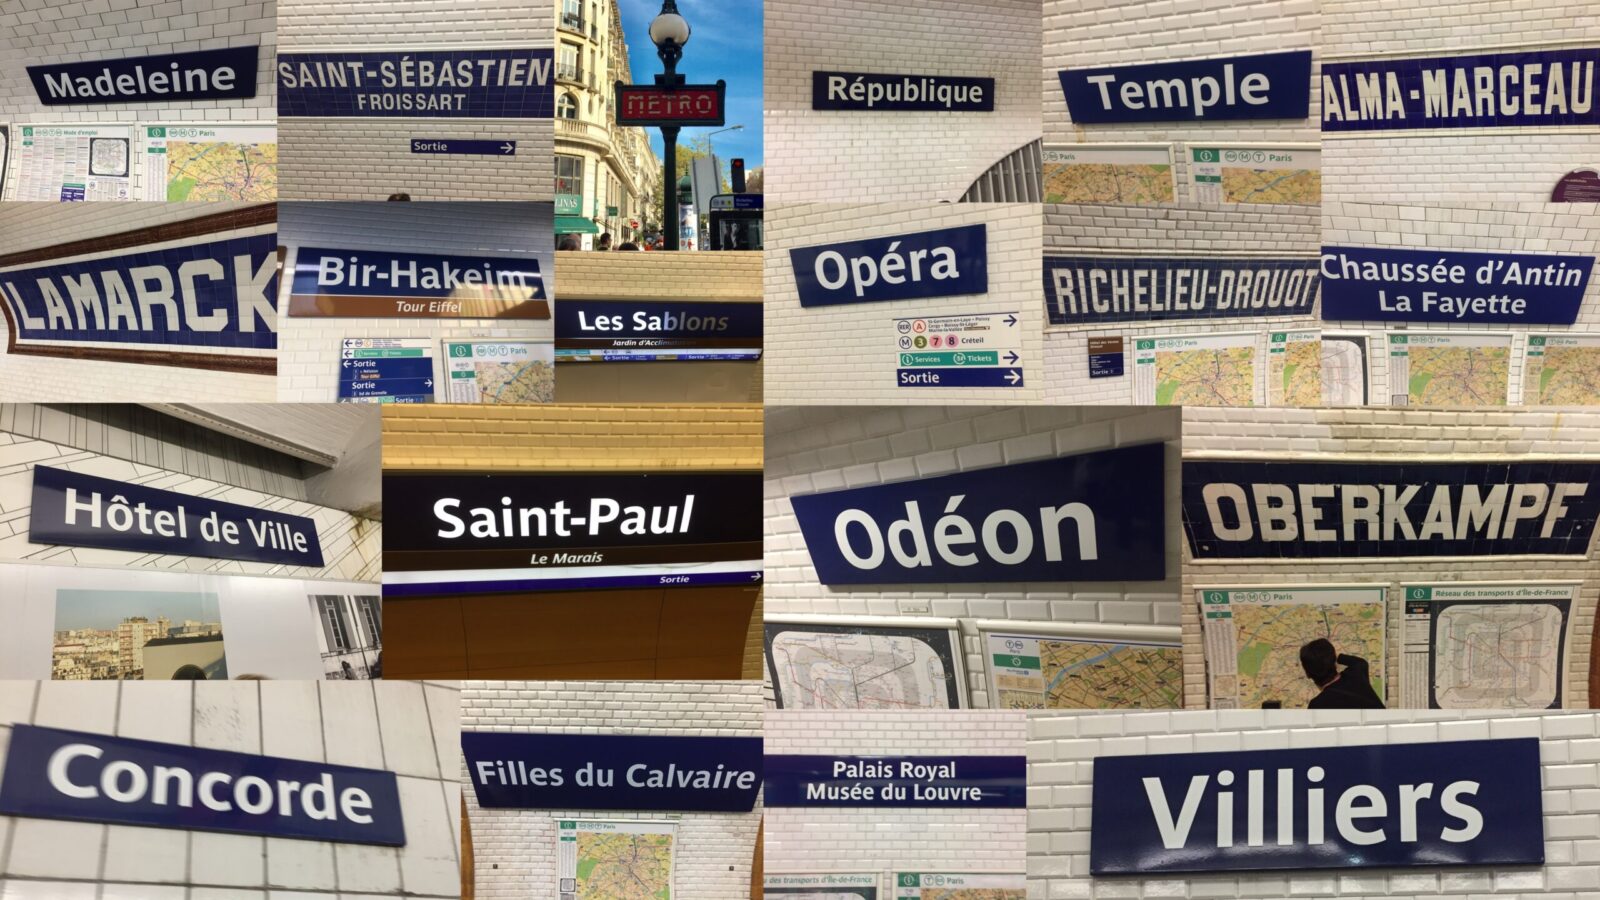 different paris metro signs in a collage